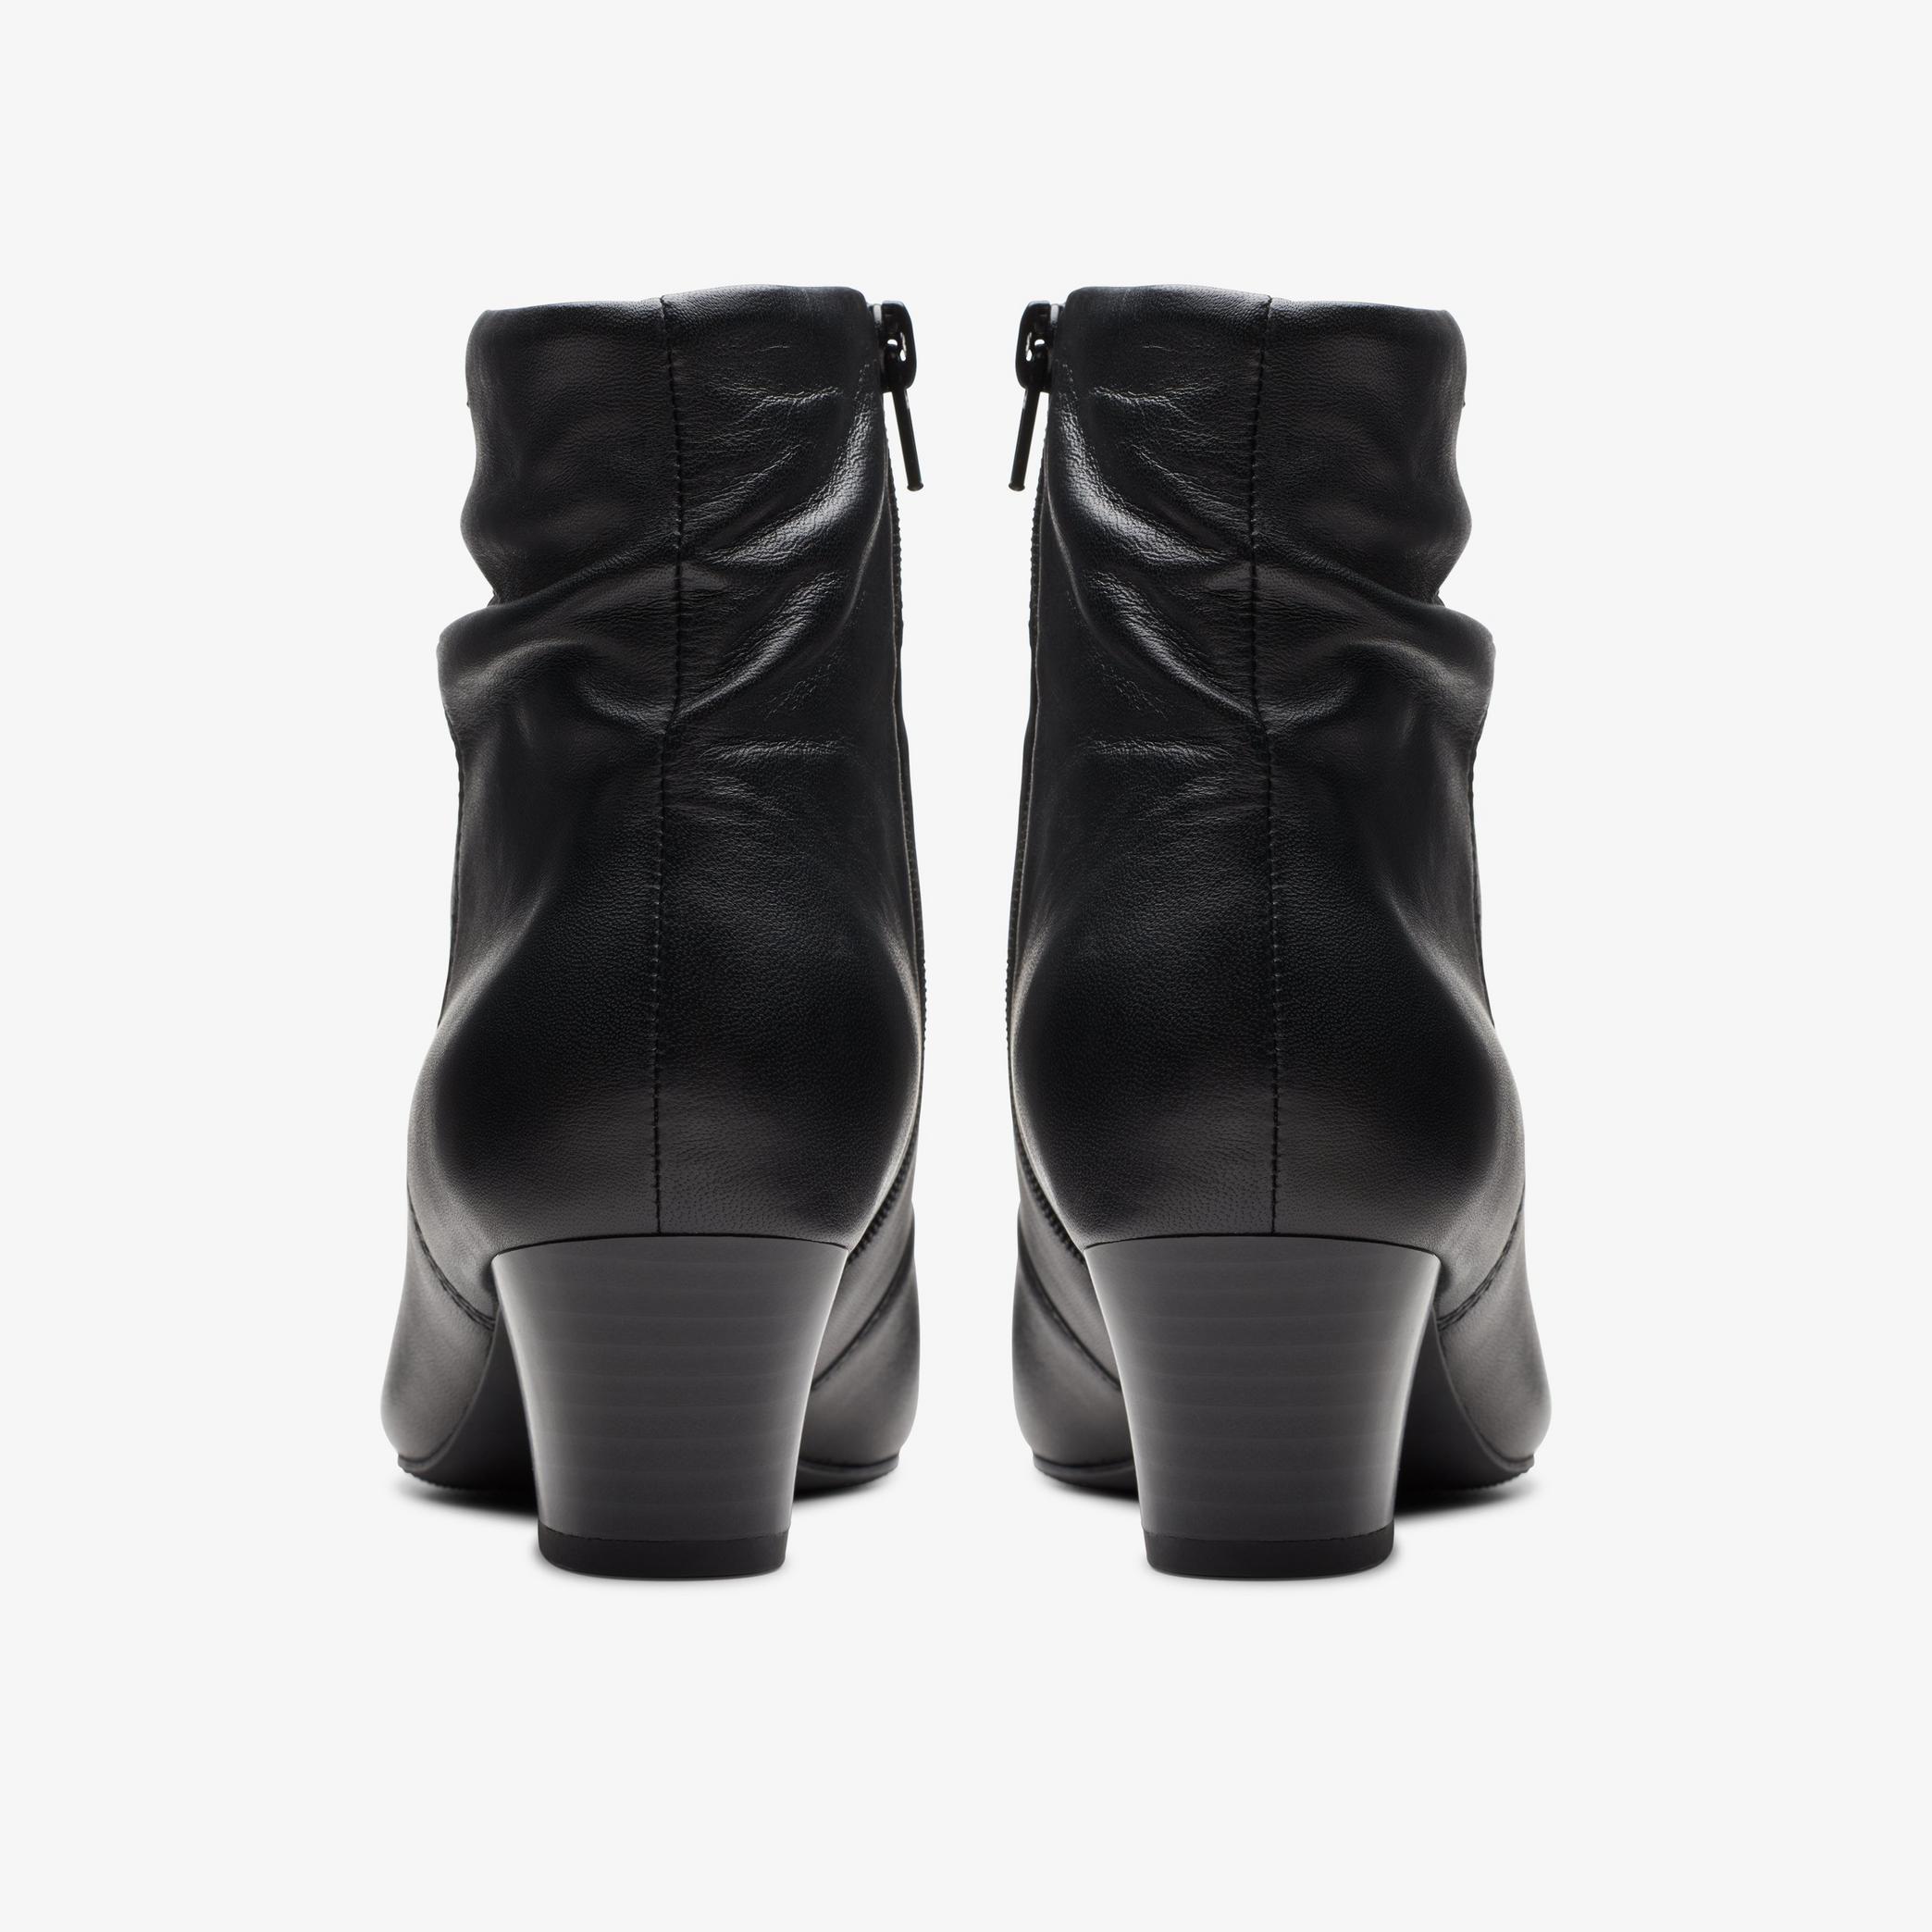 Teresa Skip Black Leather Ankle Boots, view 5 of 6